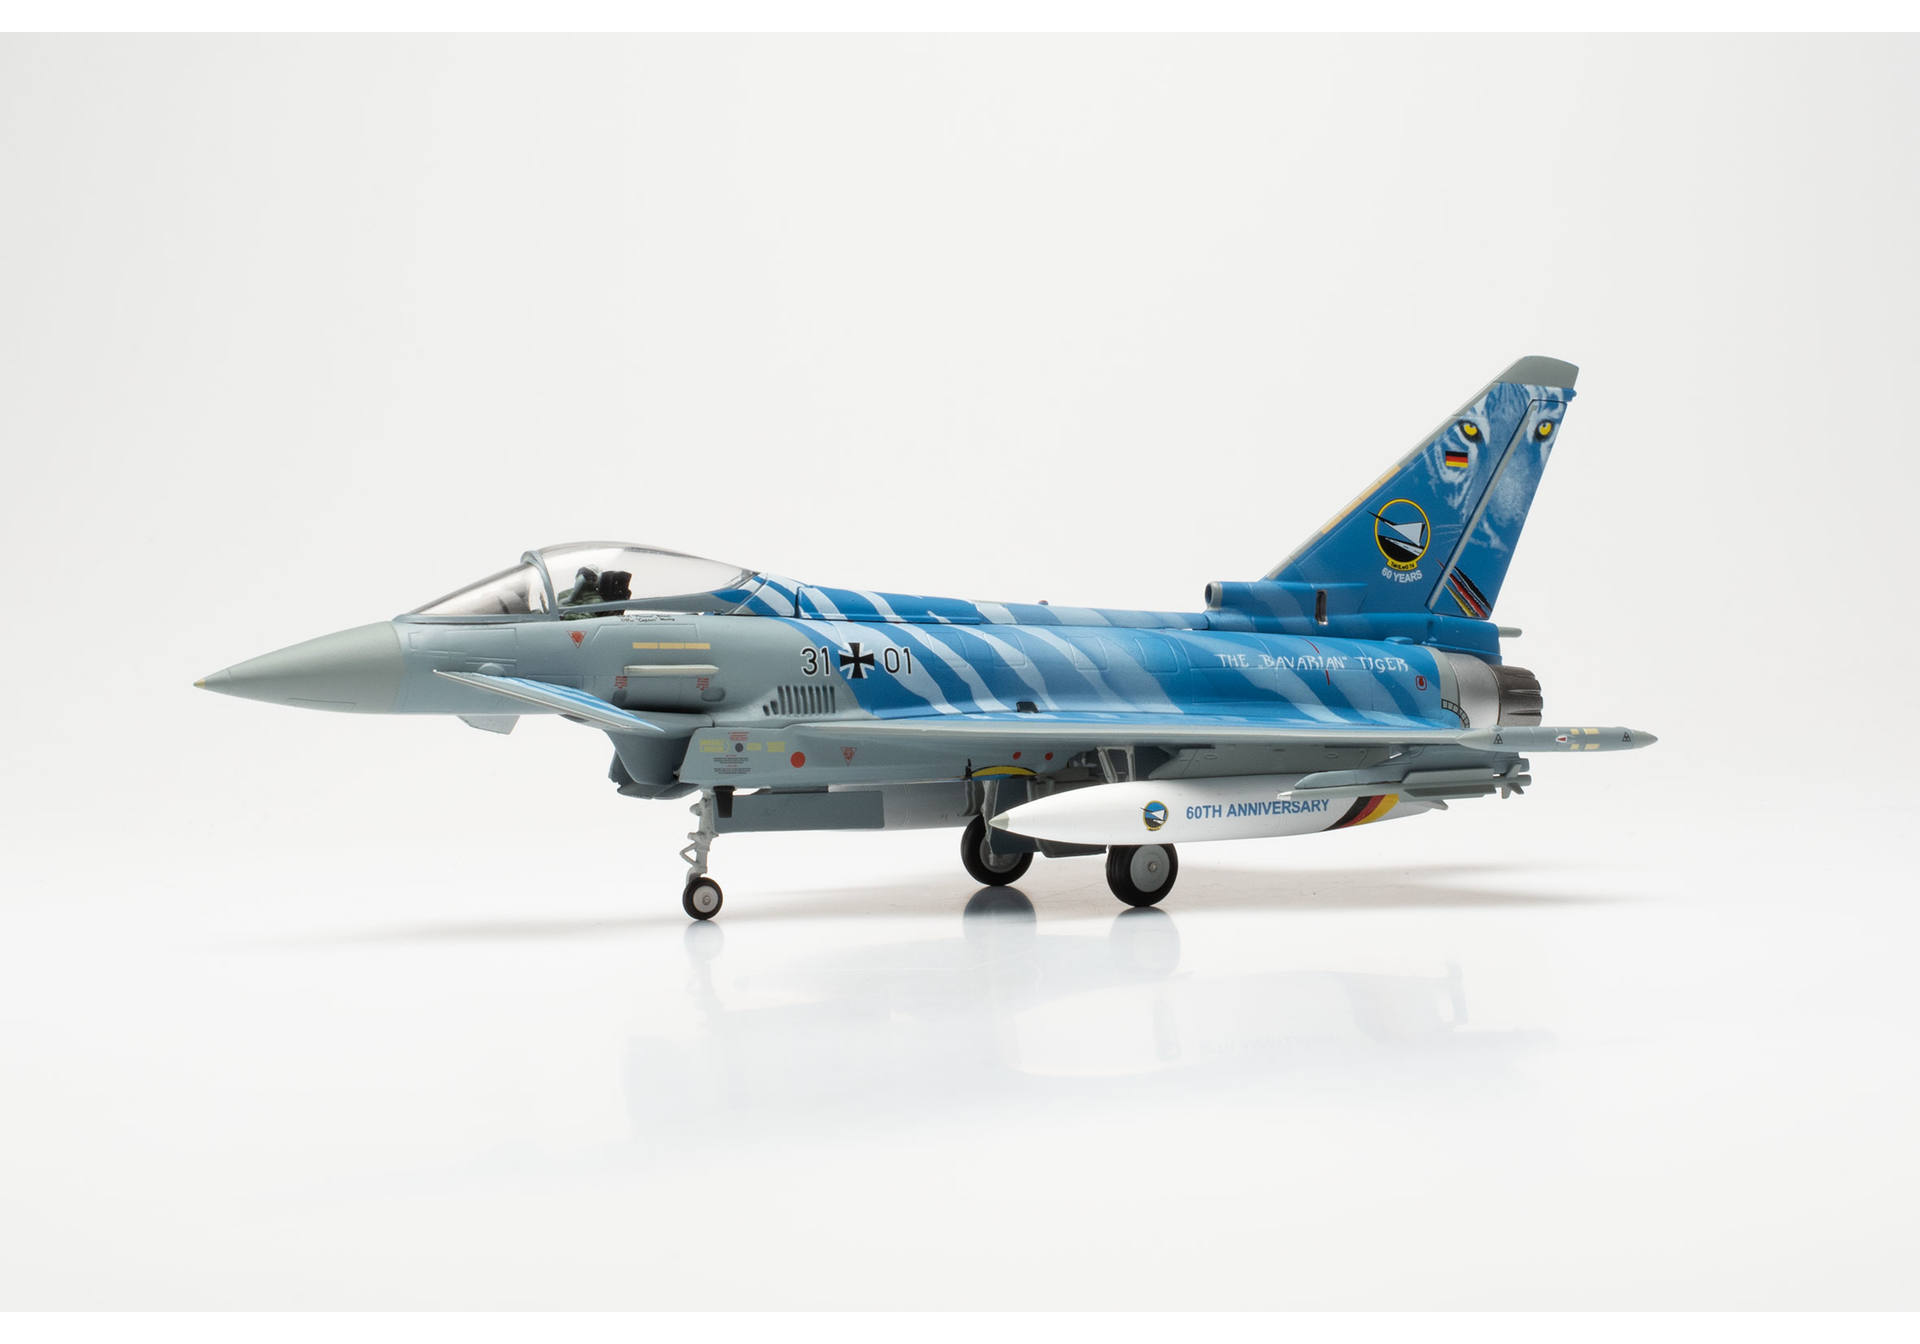 Luftwaffe Eurofighter - Tactical Air Force Squadron 74 "Bavarian Tigers" - 60th Anniversary - 31+01